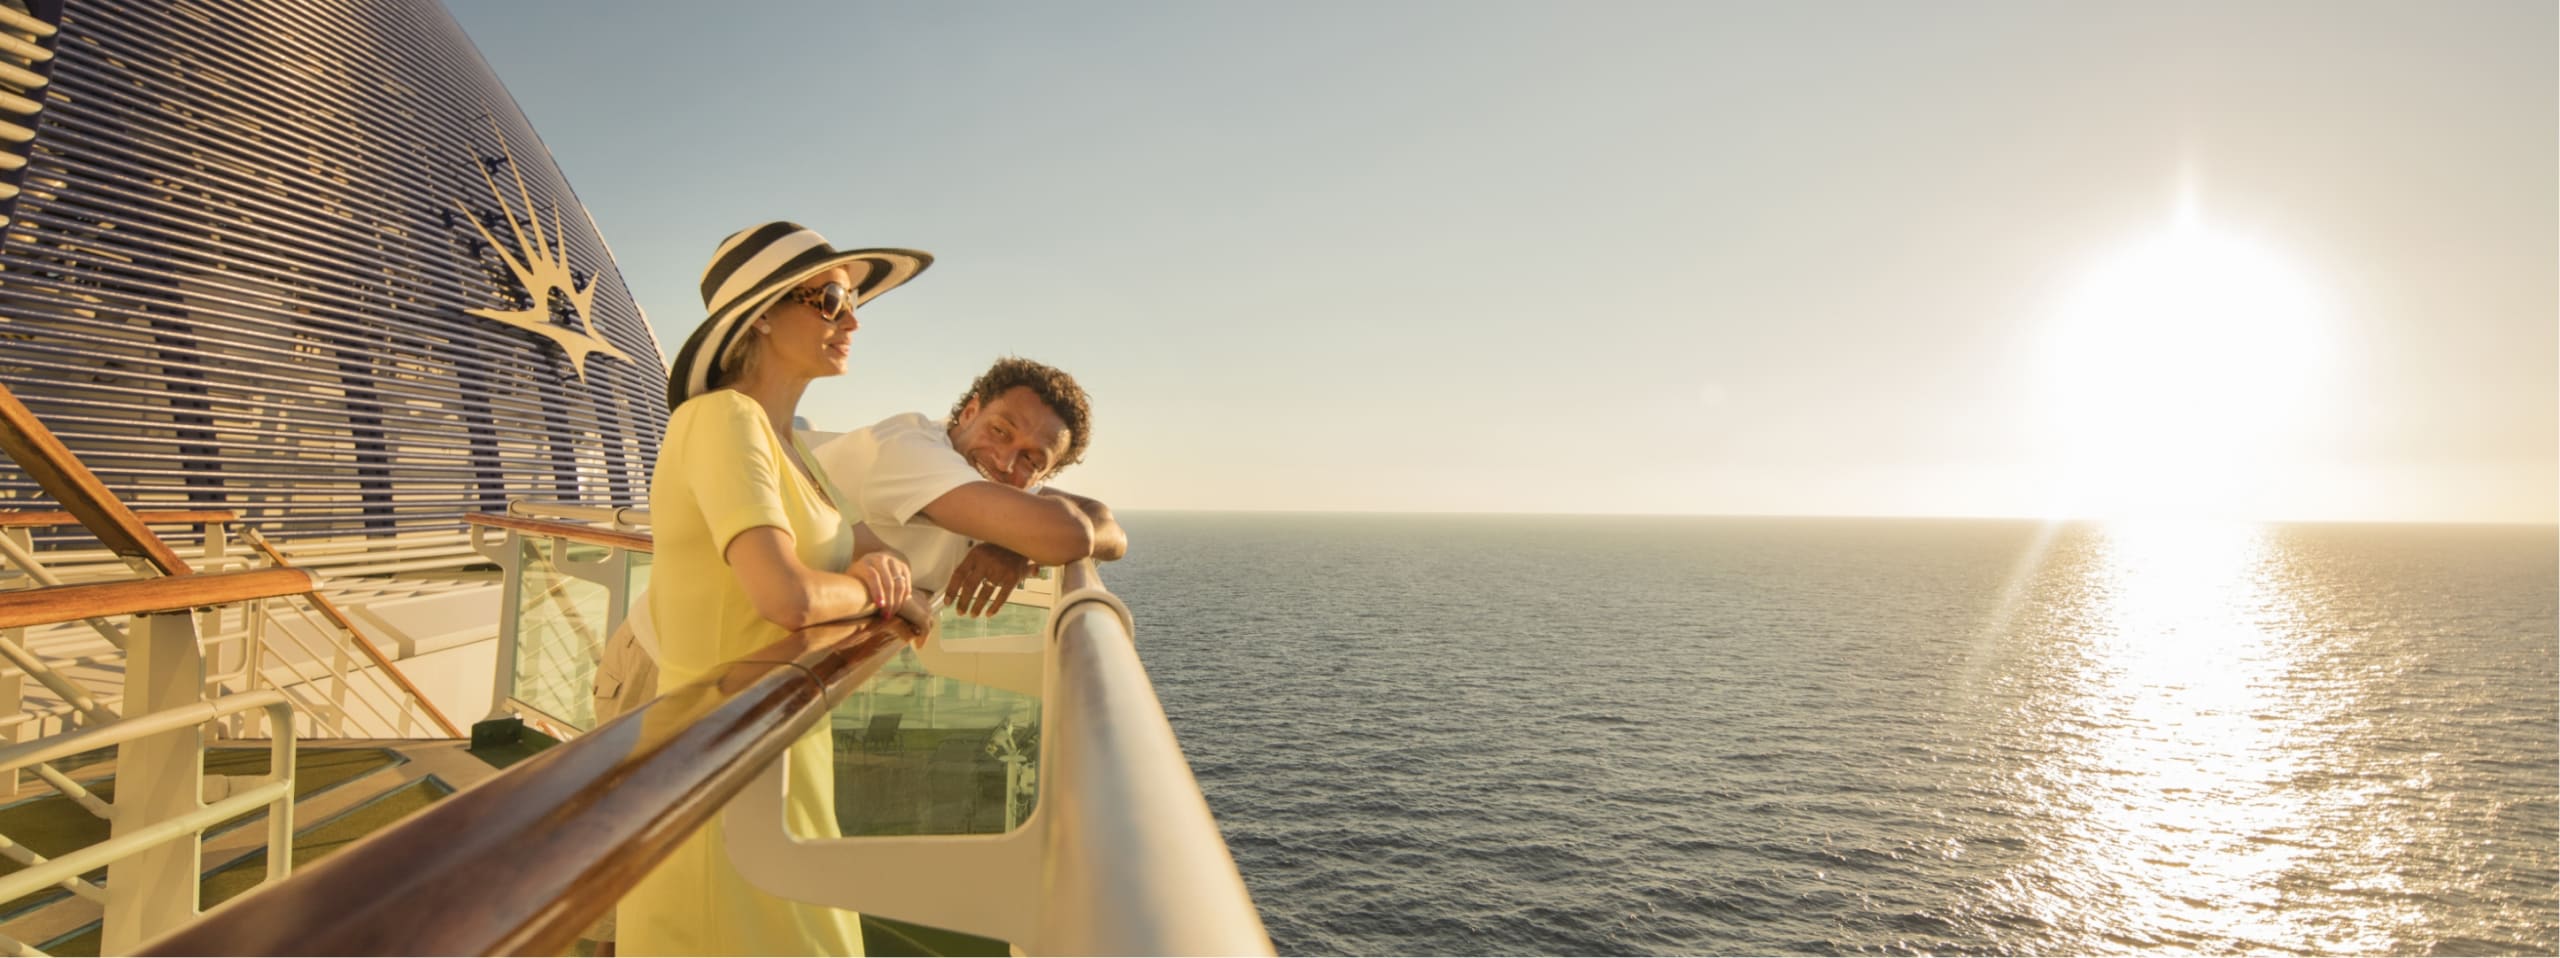 P&O Holiday Like Never Before – Terms and Conditions